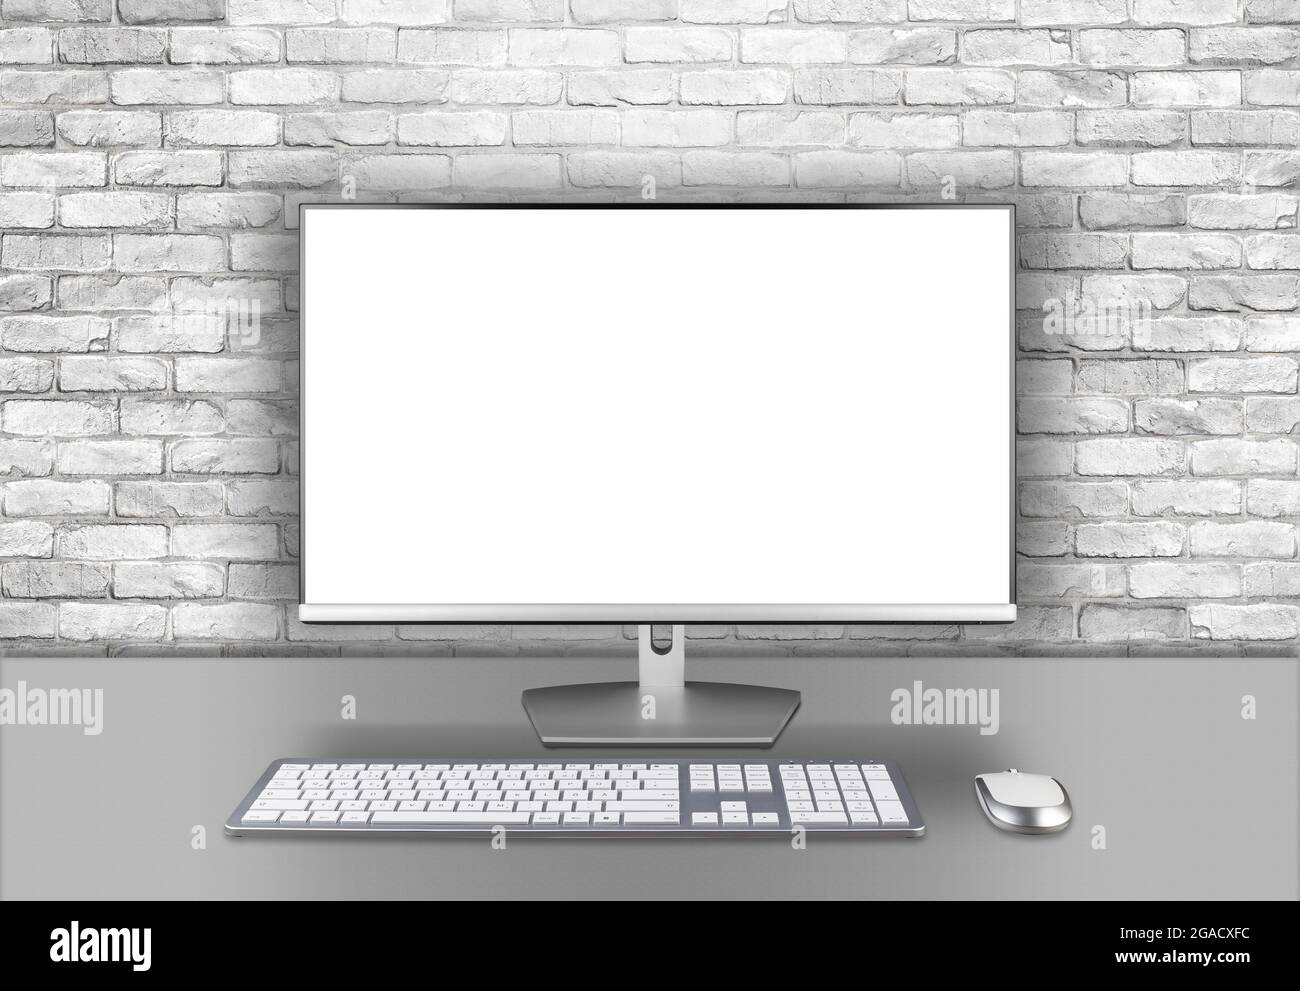 Modern silver black LED computer flat screen display monitor isolated work desk brick wall background. pc hardware electronics technology concept Stock Photo